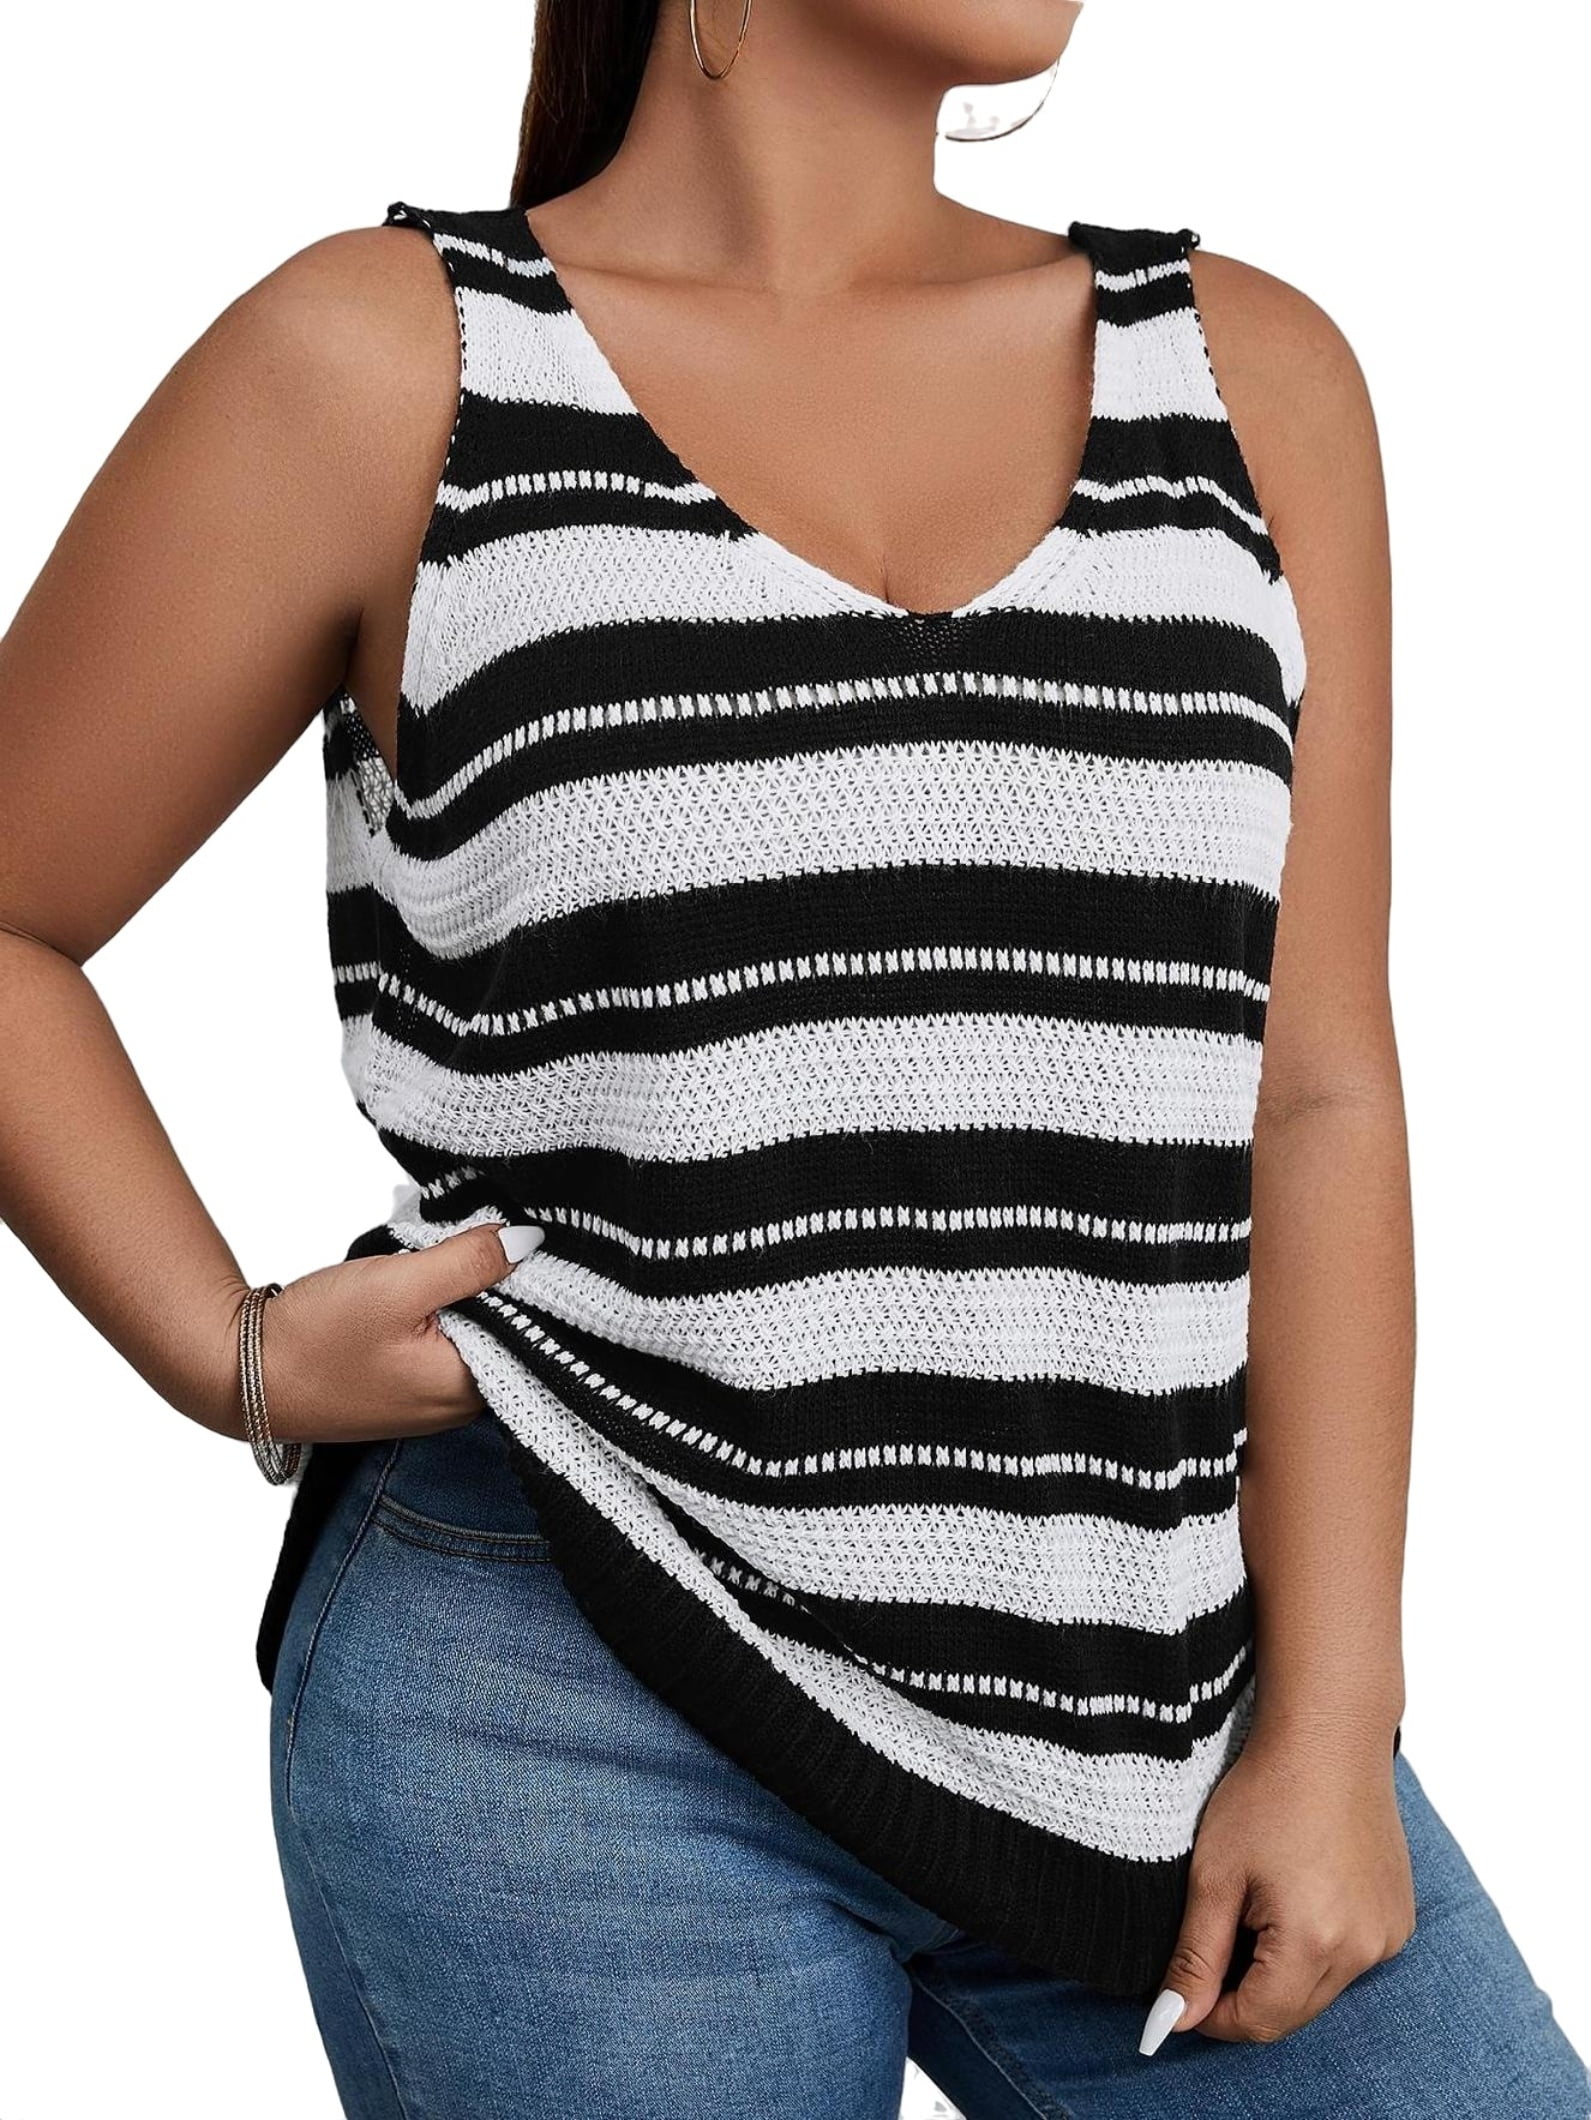 Women's Casual Striped V neck Black and White Plus Size Knit Tops 0XL ...